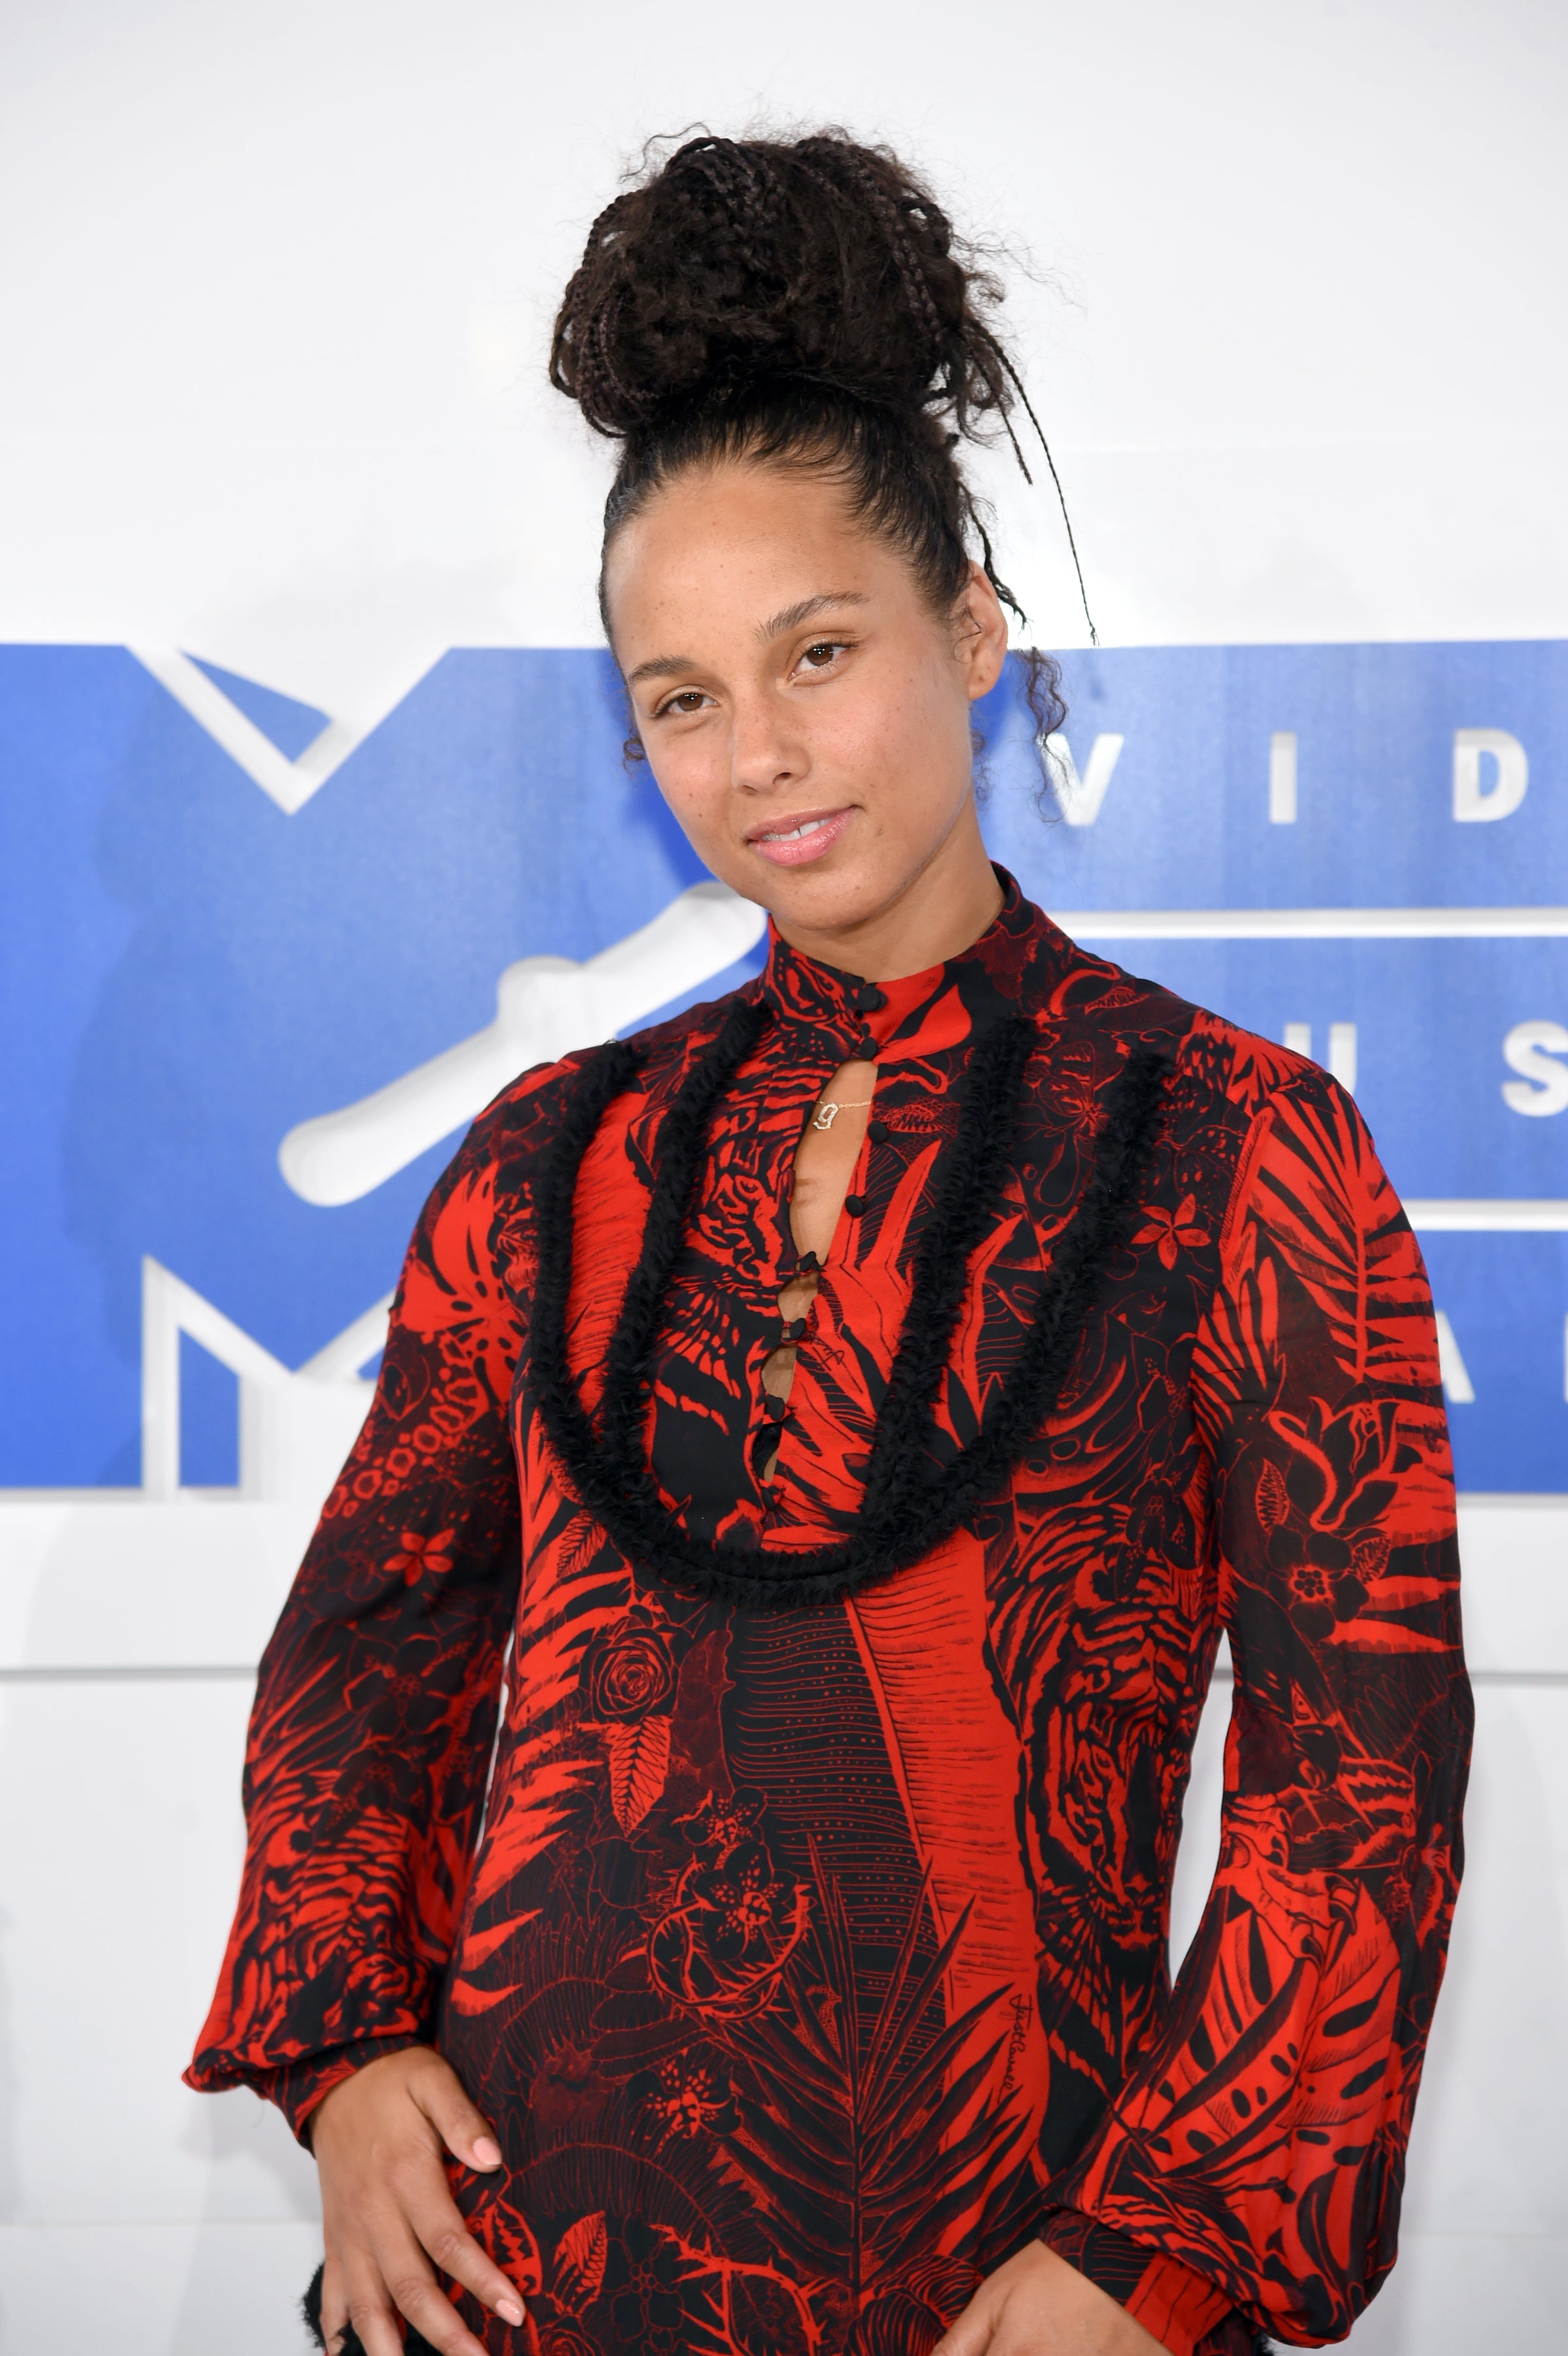 Alicia Keys Honors Anniversary Of Dr. King's 'I Have A Dream' Speech
